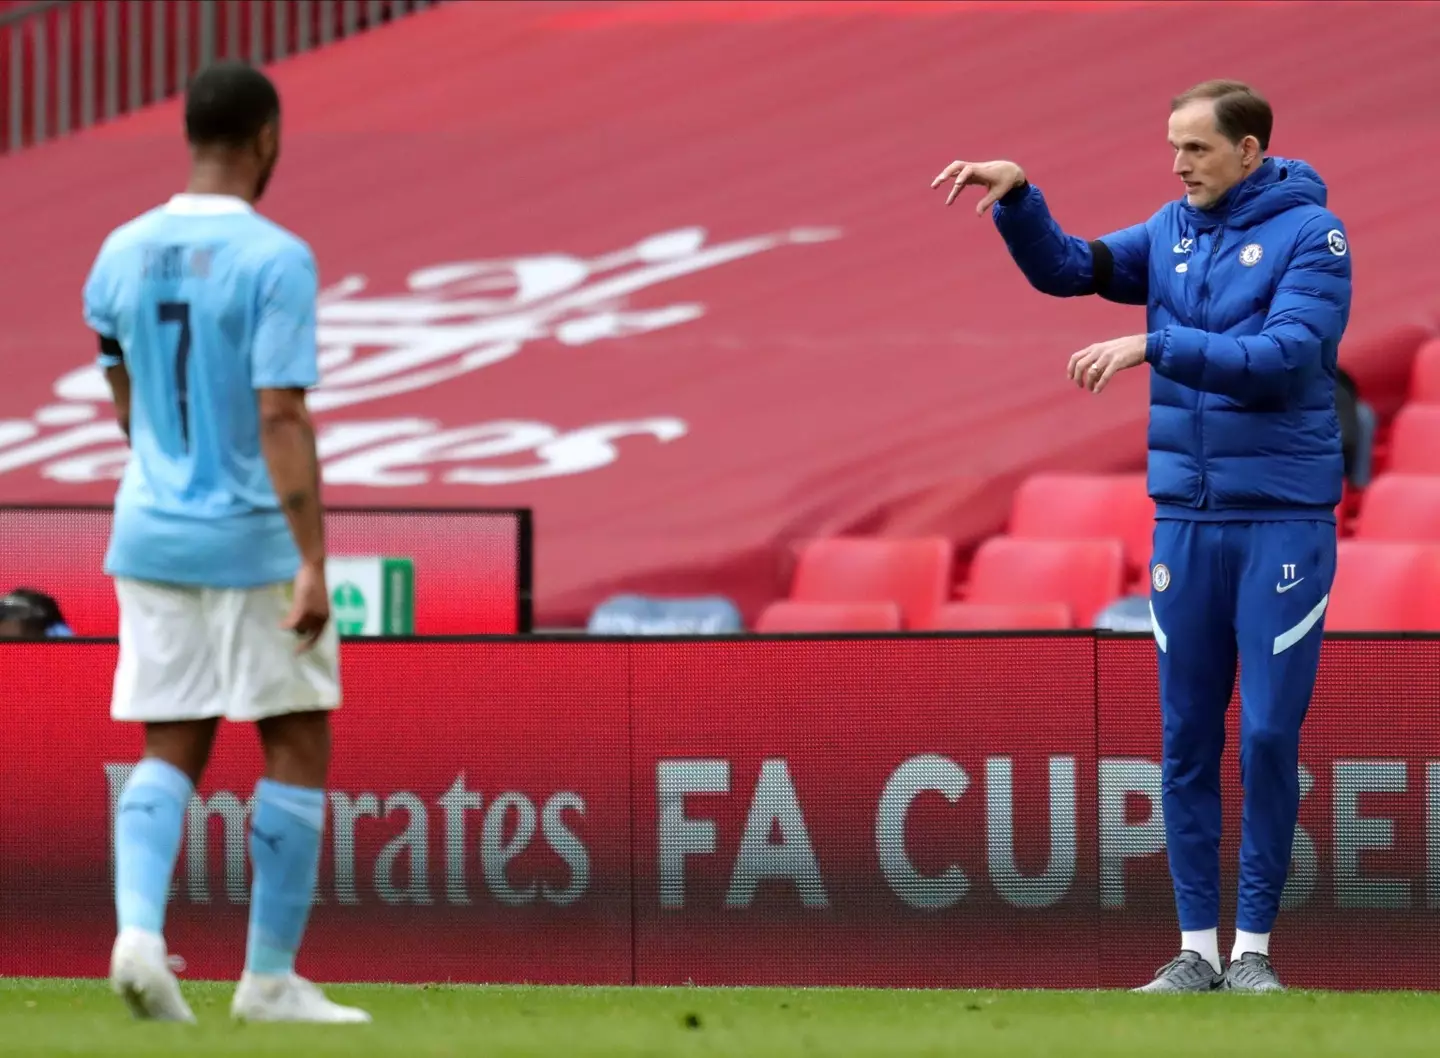 Thomas Tuchel delivers instructions as Raheem Sterling looks on. (Alamy)